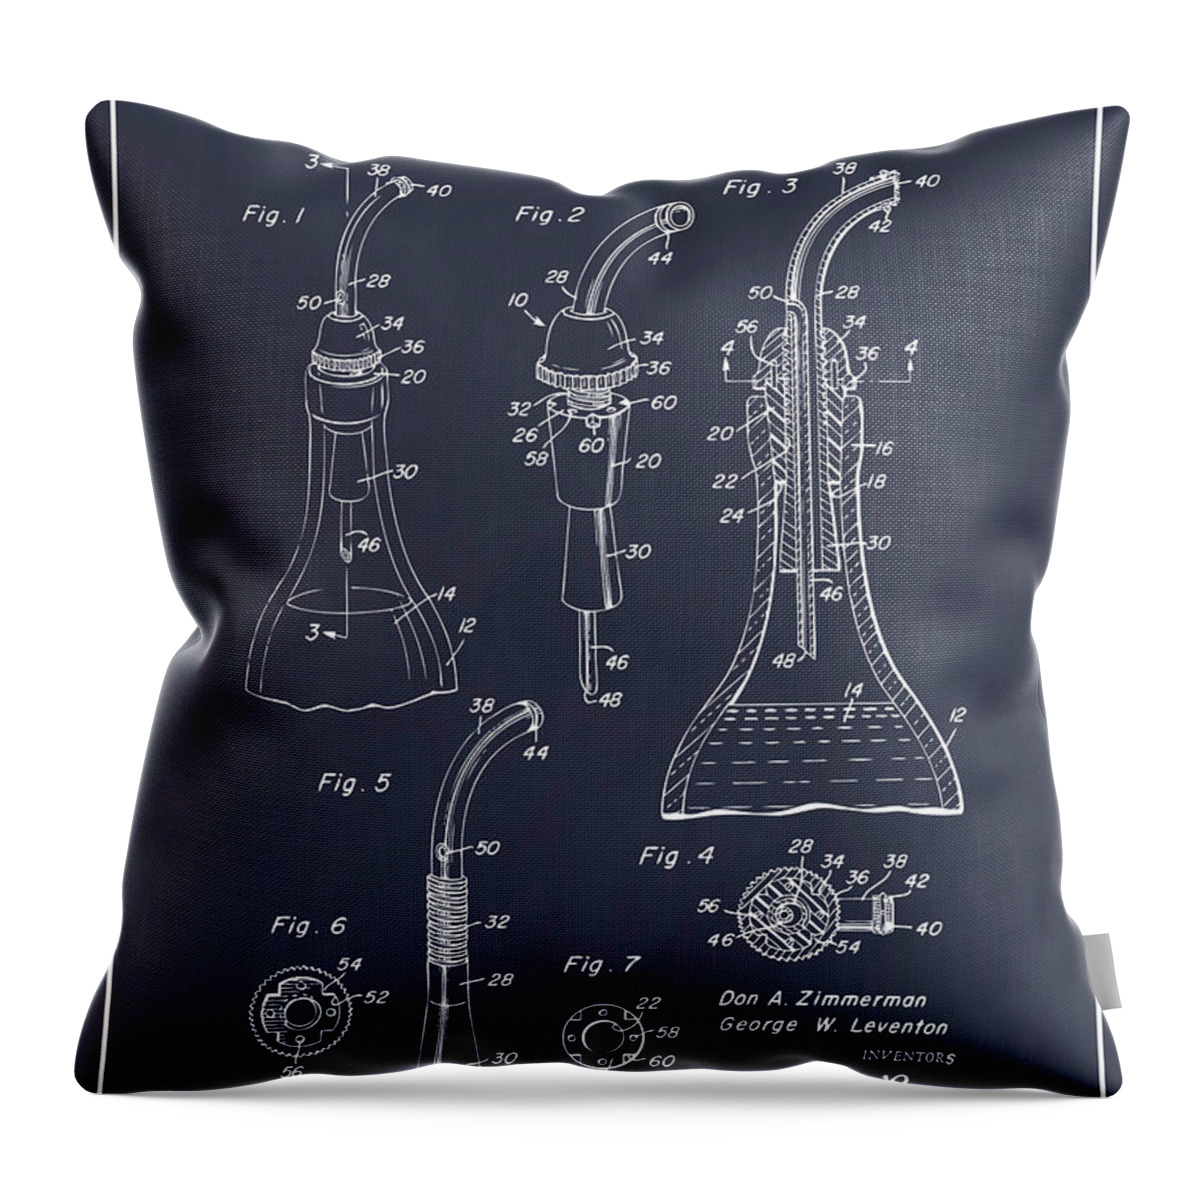 1964 Bottle Pourer Patent Print Throw Pillow featuring the drawing 1964 Bottle Pourer Blackboard Patent Print by Greg Edwards